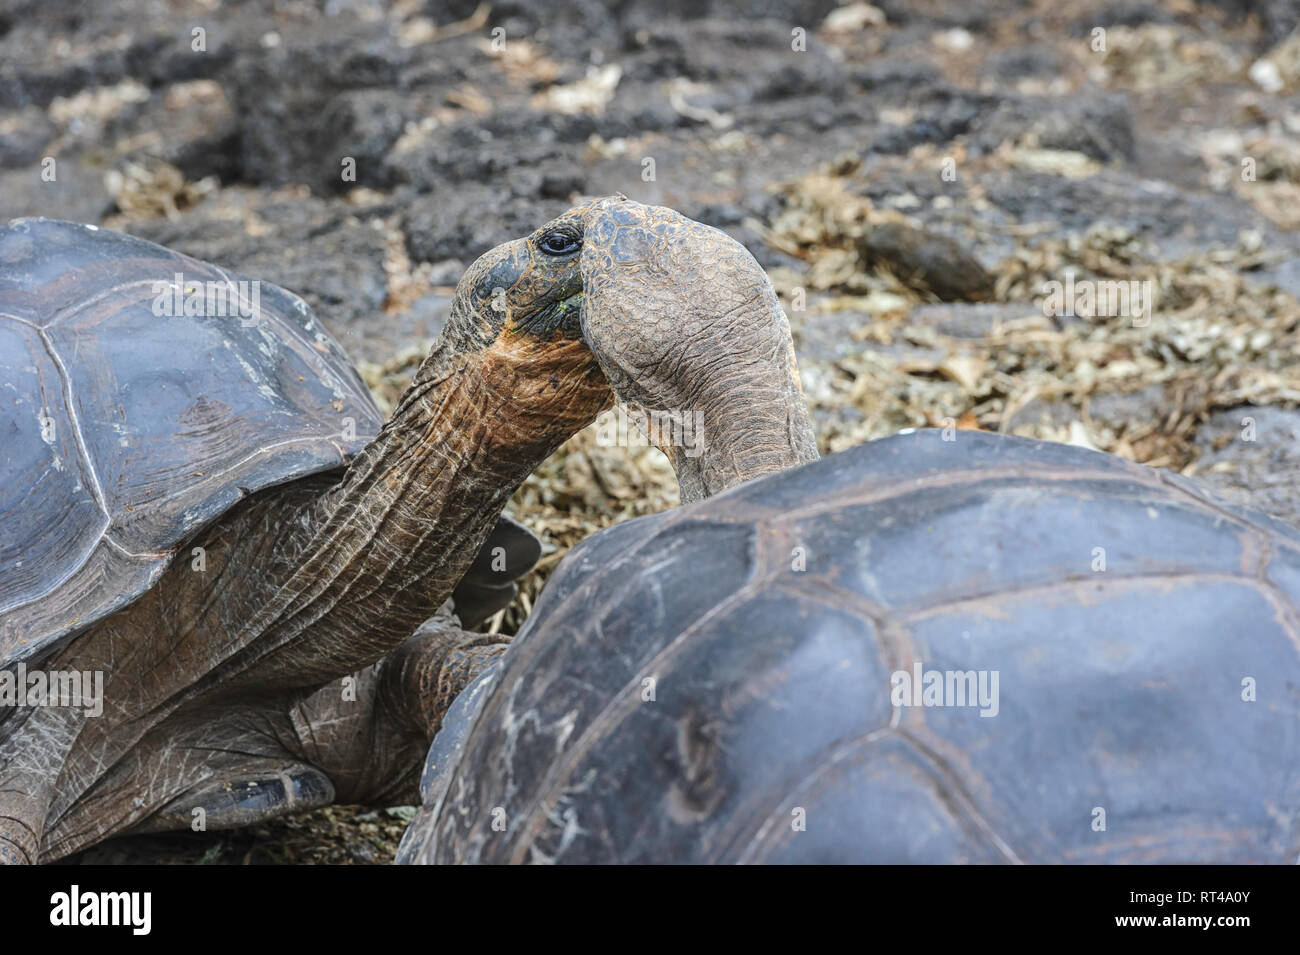 Close-up of two tortoises (Chelonoidis niger) who look like they are about to kiss. Galapagos Islands, Ecuador Stock Photo